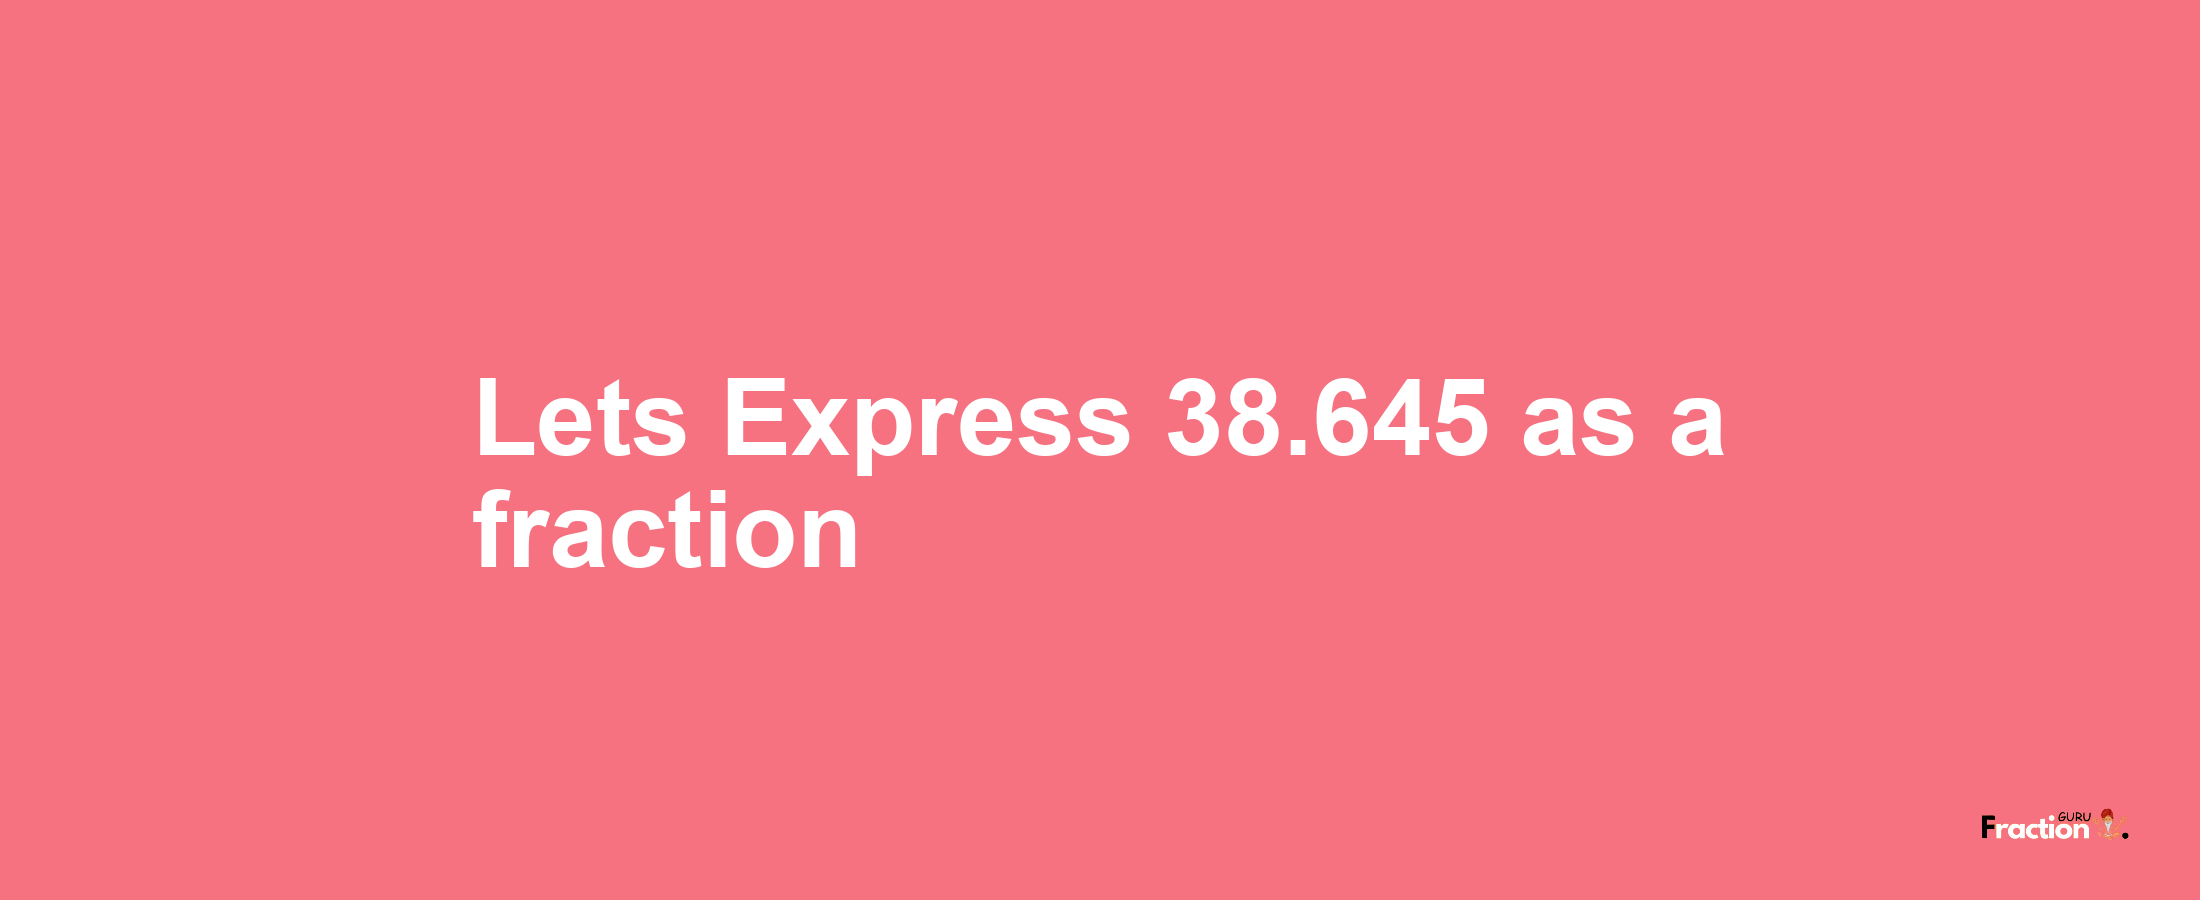 Lets Express 38.645 as afraction